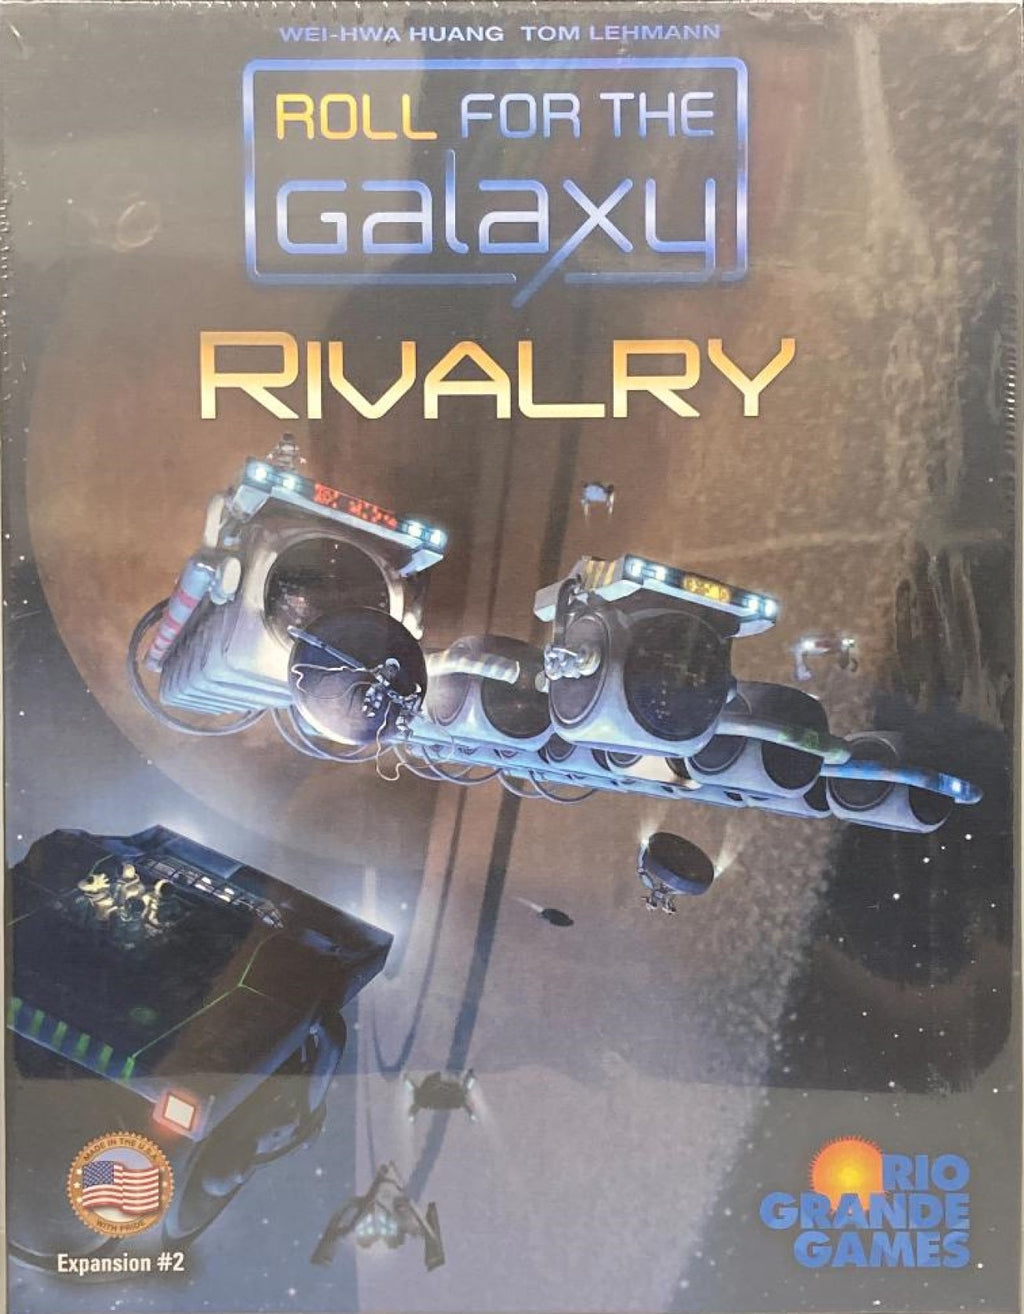 Roll for the Galaxy : Rivalry Expansion #2 - The Comic Warehouse